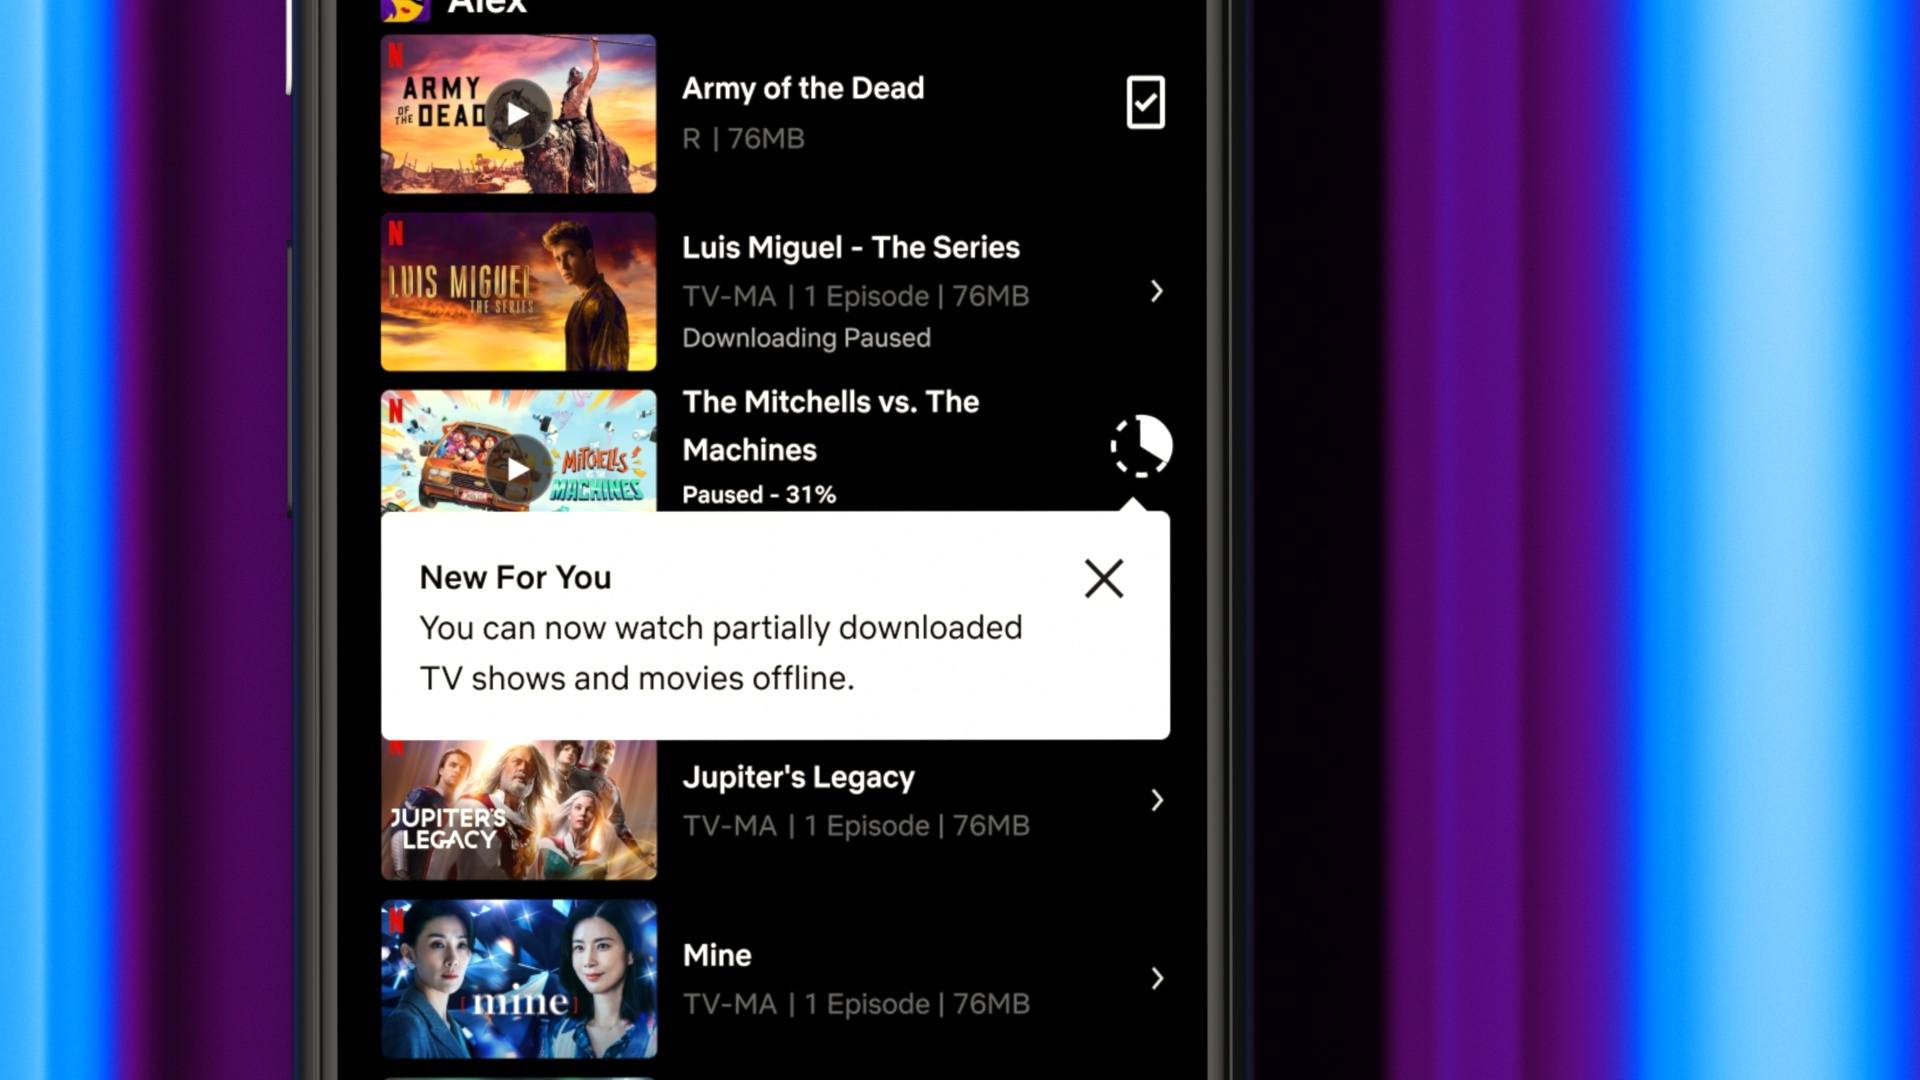 Netflix Now Allows Android Users to Watch Partially Downloaded Content